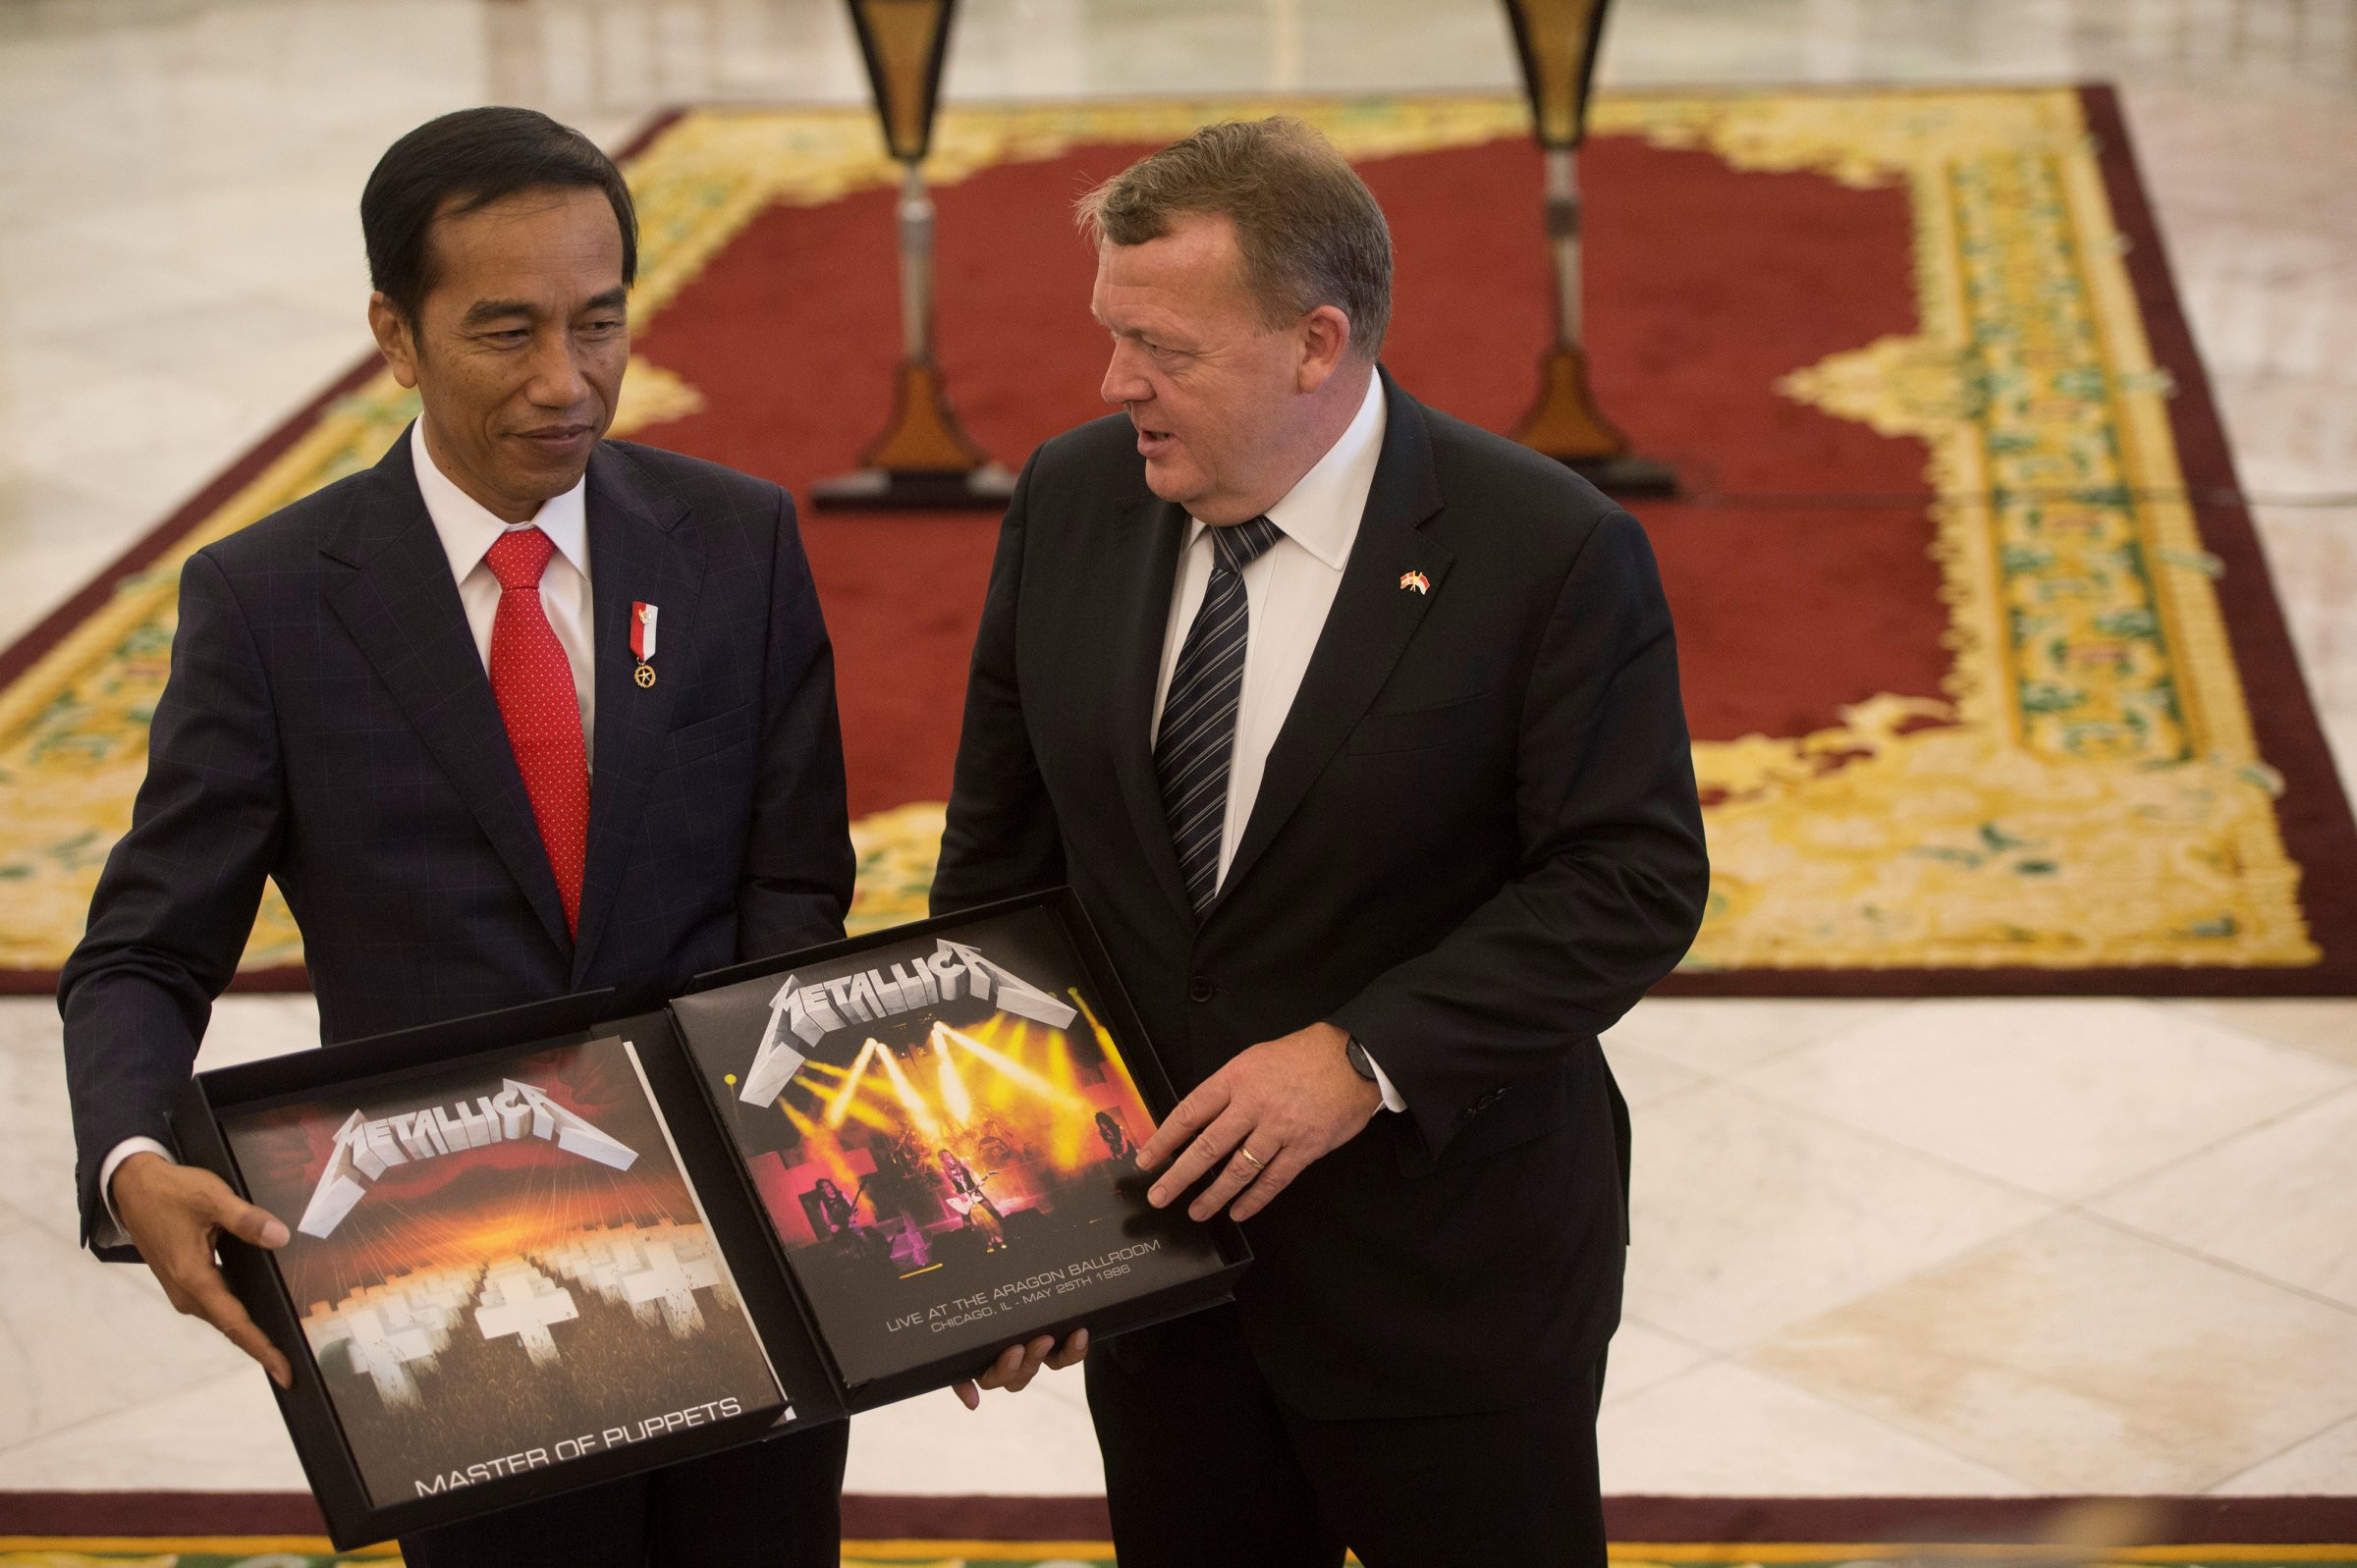 Denmark Prime Minister Lars Lokke Rasmussen gives a vinyl record of the heavy metal band Metallica to Indonesian President Joko Widodo after a joint press conference at the Presidential Palace in Bogor